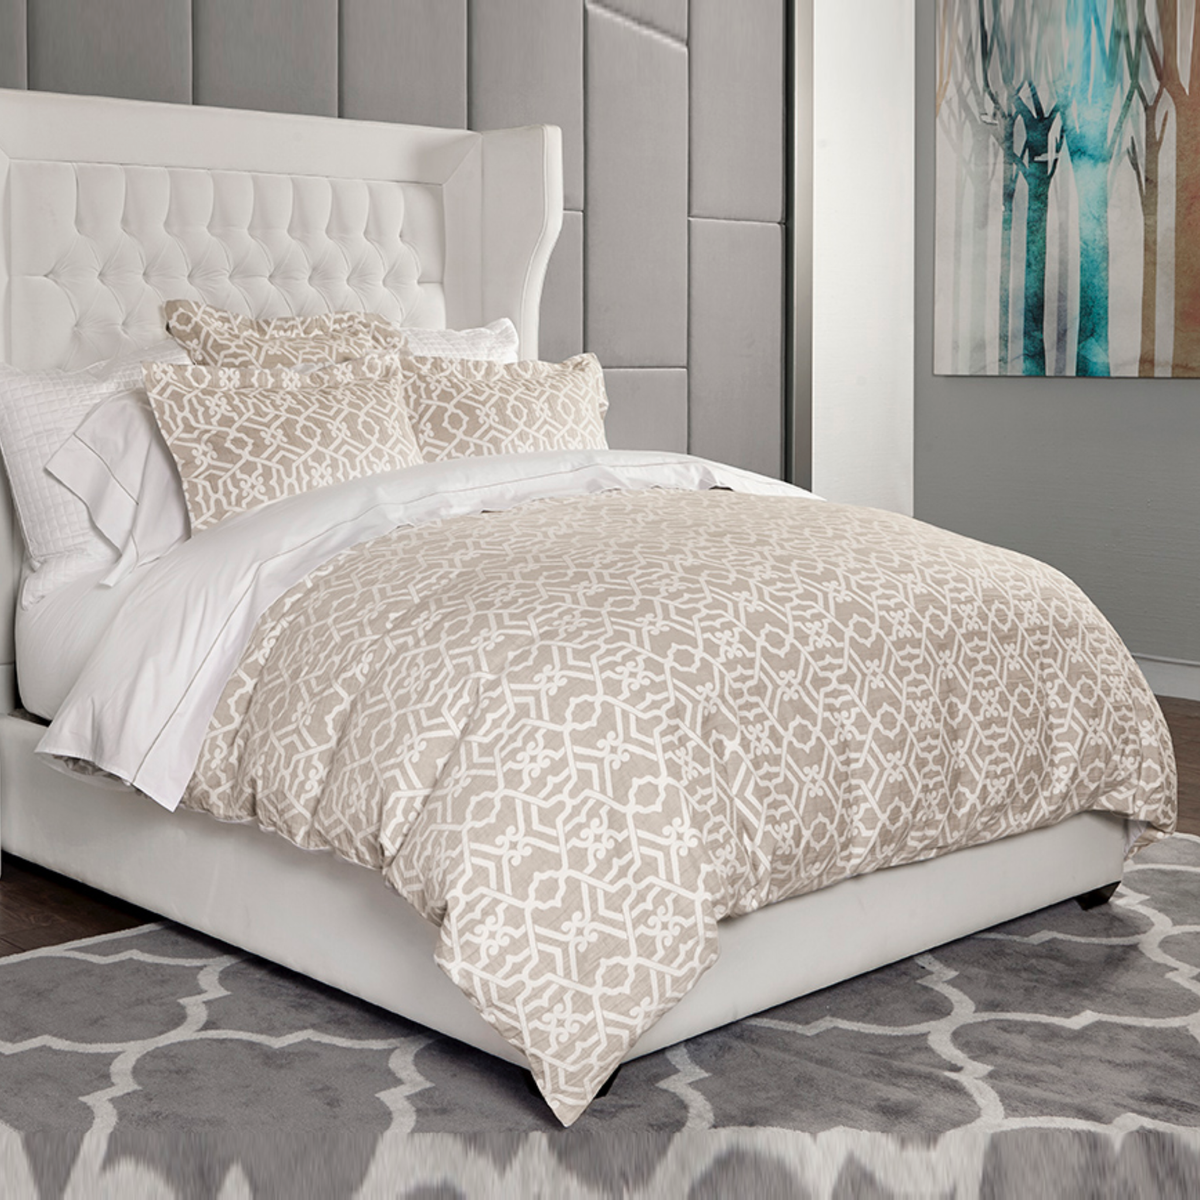 Full Bed Dressed in Downtown Company Taylor Bedding in Taupe Color